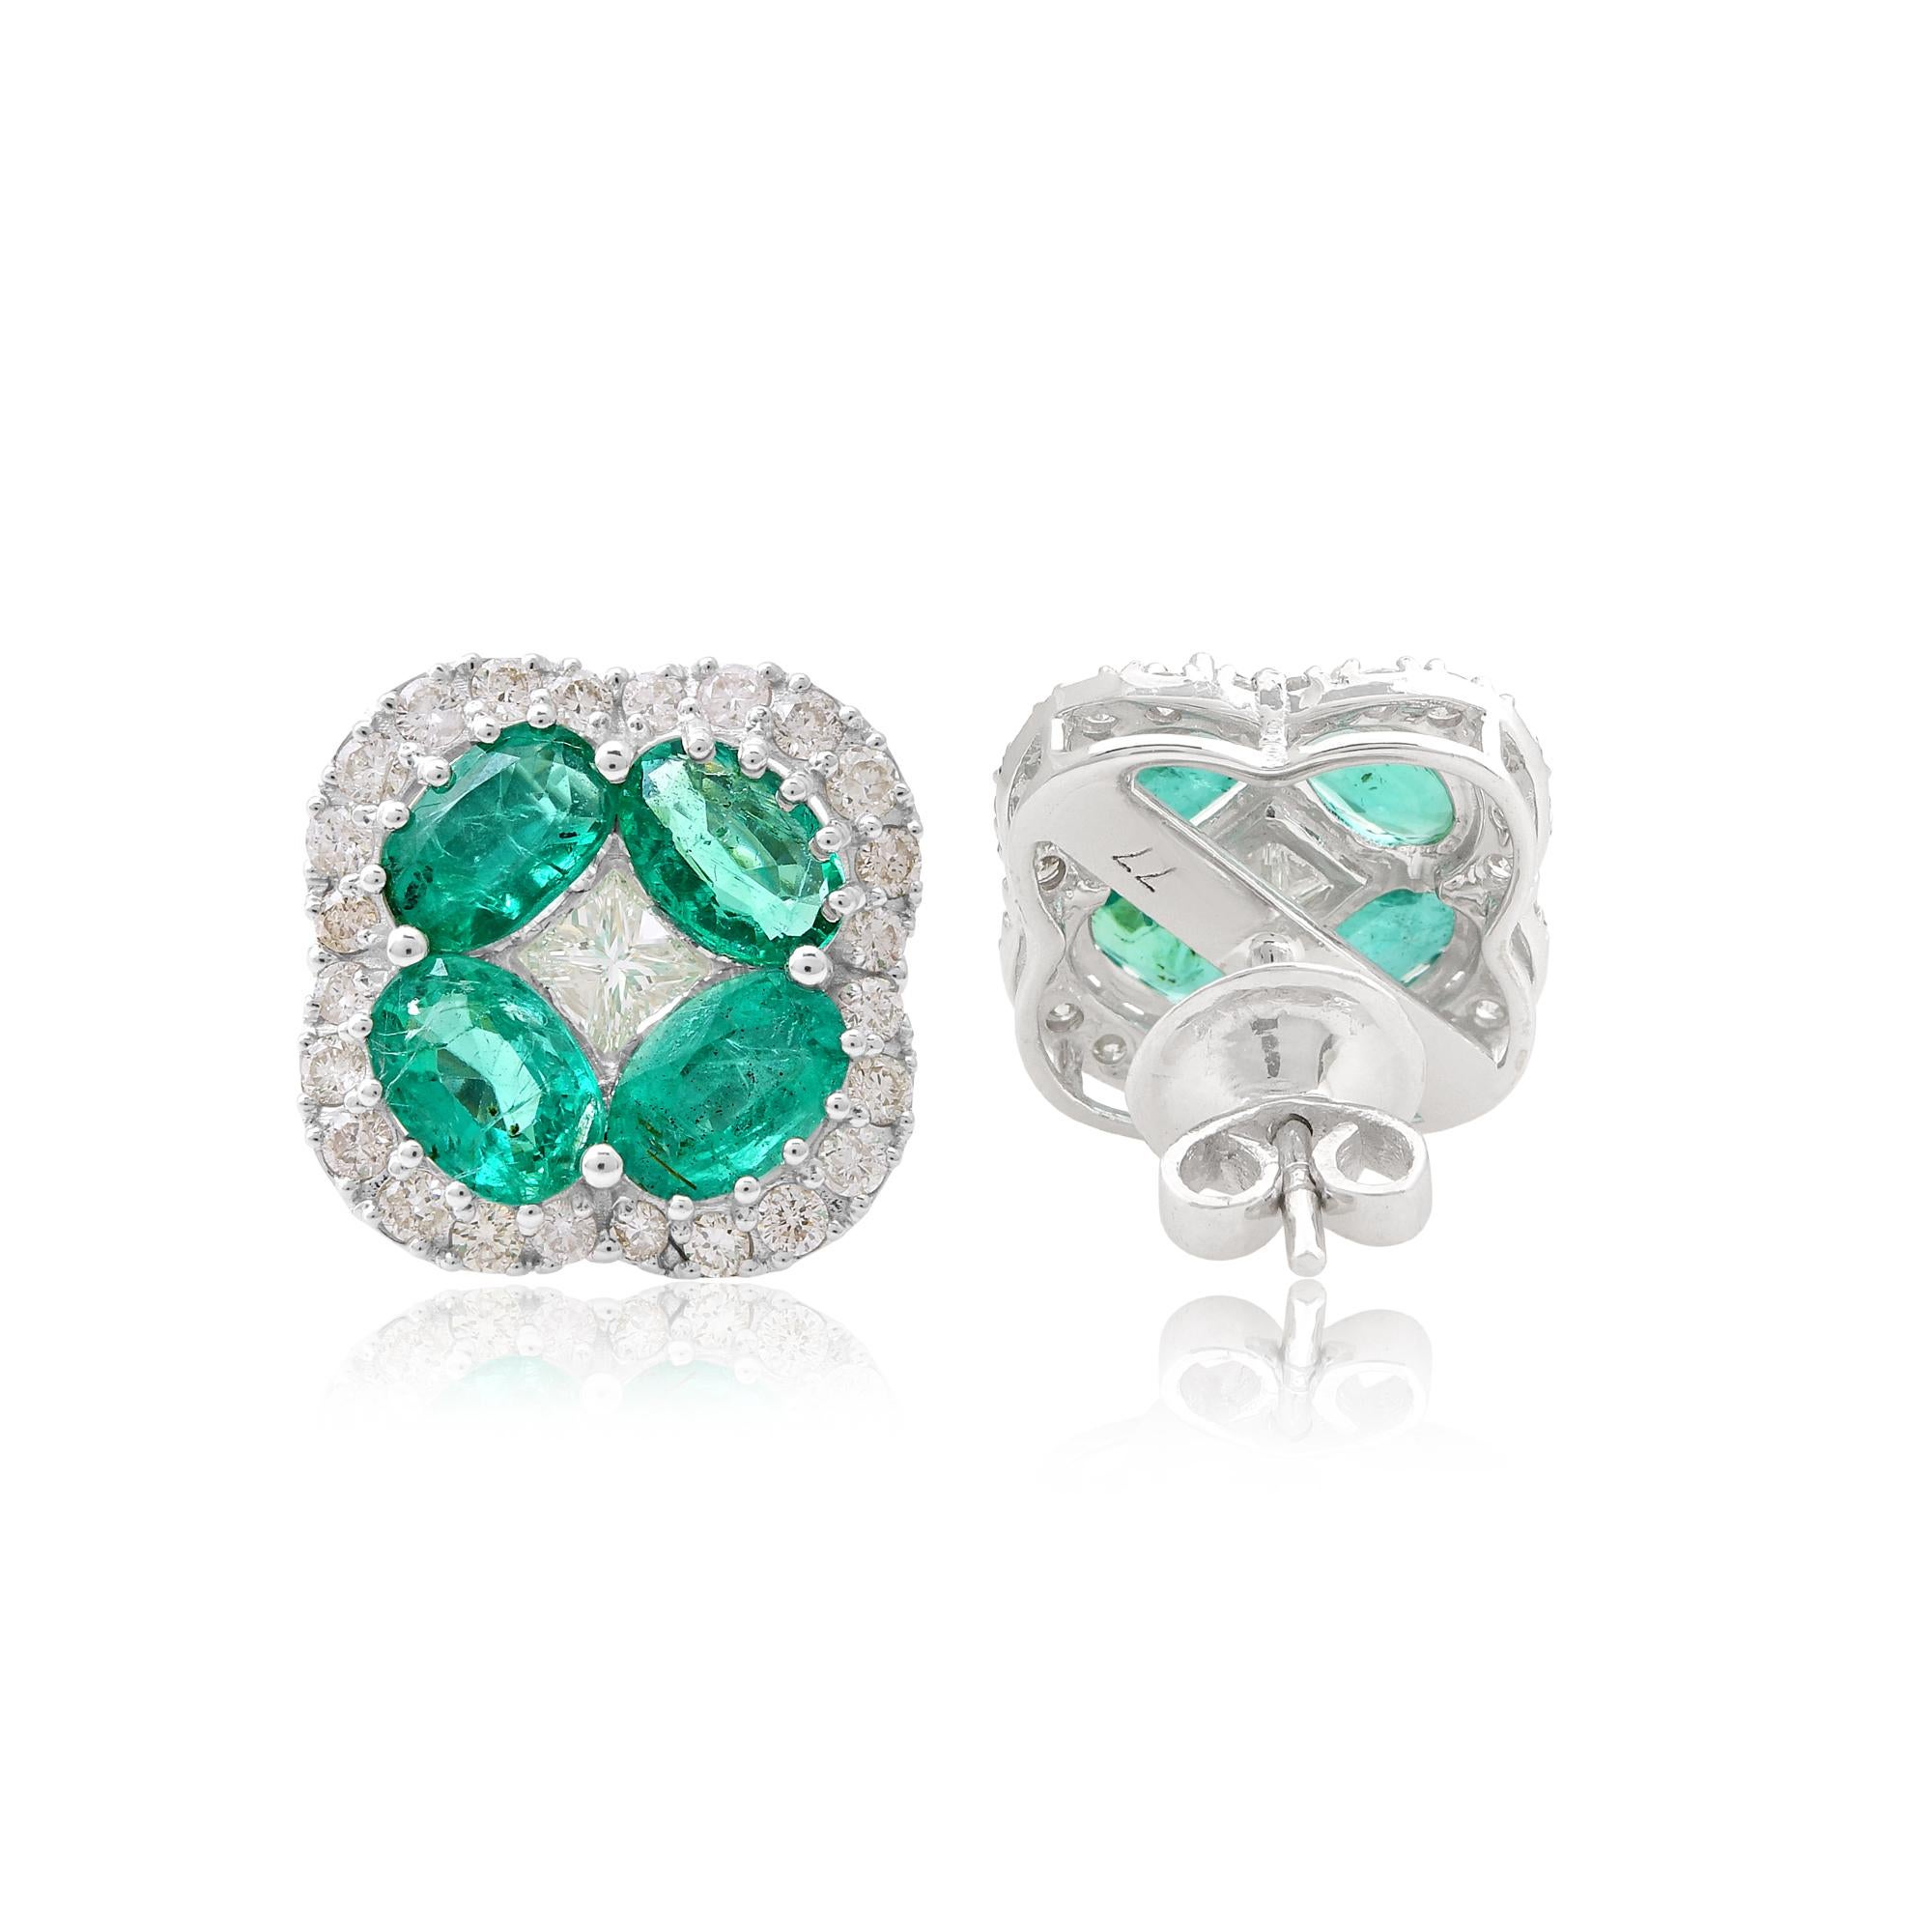 Item Code :- SEE-11790
Gross Wt. :- 6.10 gm
Solid 18k White Gold Wt. :- 5.21 gm
Natural Diamond Wt. :- 1.11 ct.  ( AVERAGE DIAMOND CLARITY SI1-SI2 & COLOR H-I )
Natural Emerald Wt. :- 3.33 ct.
Earrings Size :- 14x14 mm approx.

✦